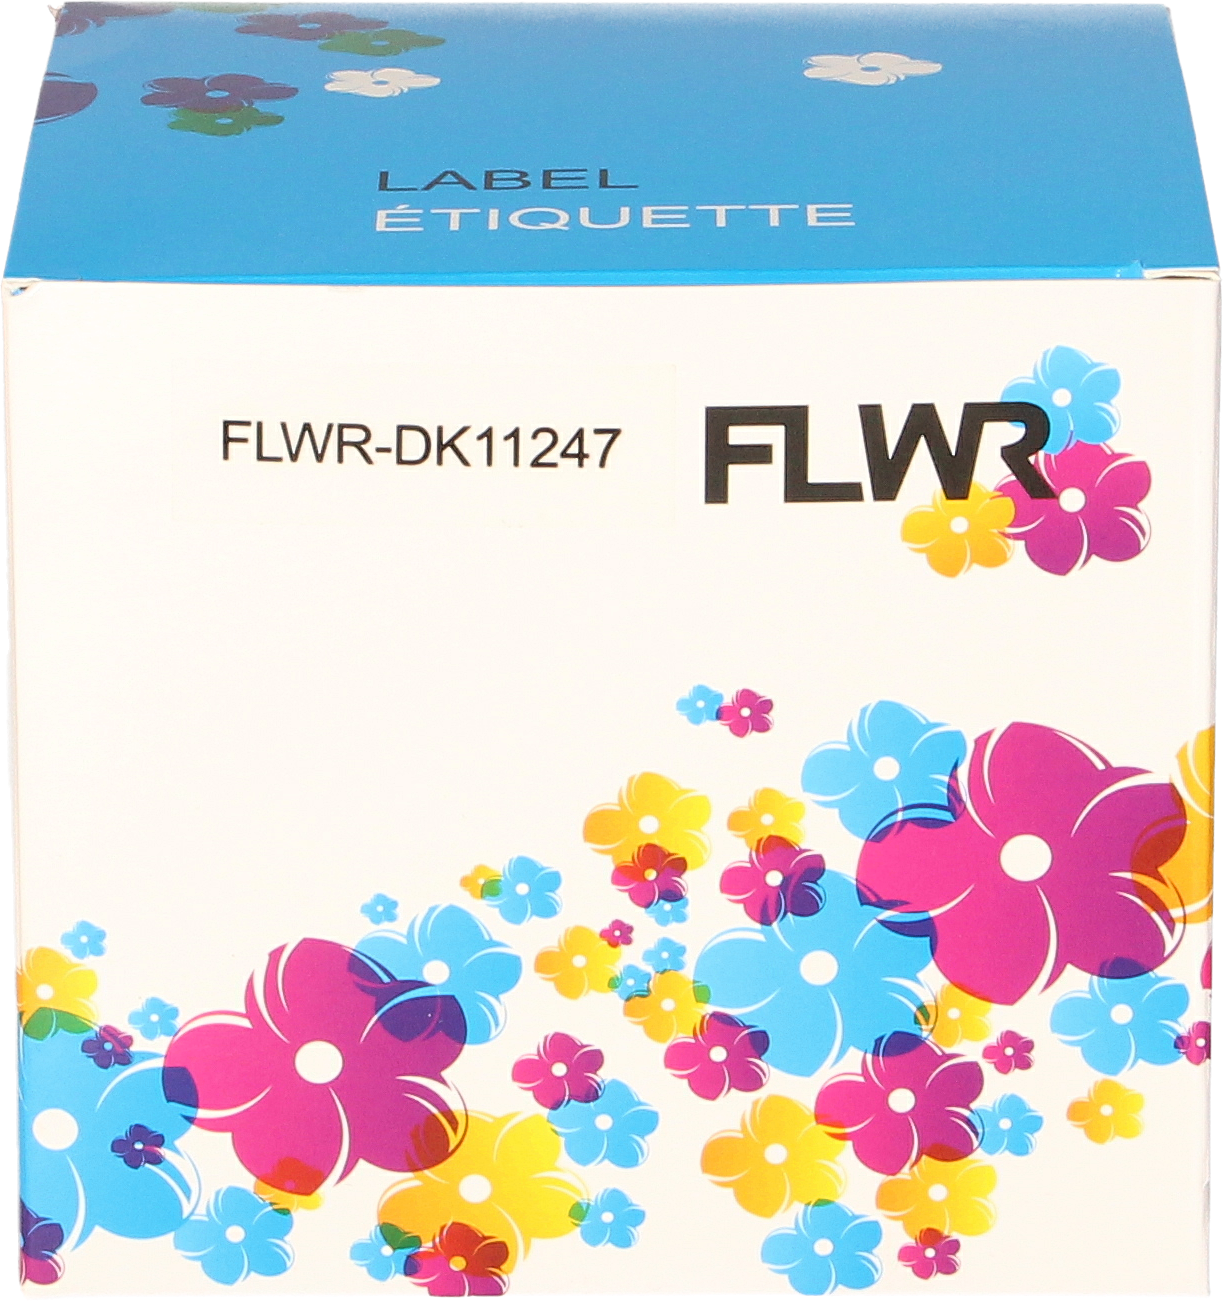 FLWR Brother  DK-11247 164 mm x 103 mm  wit